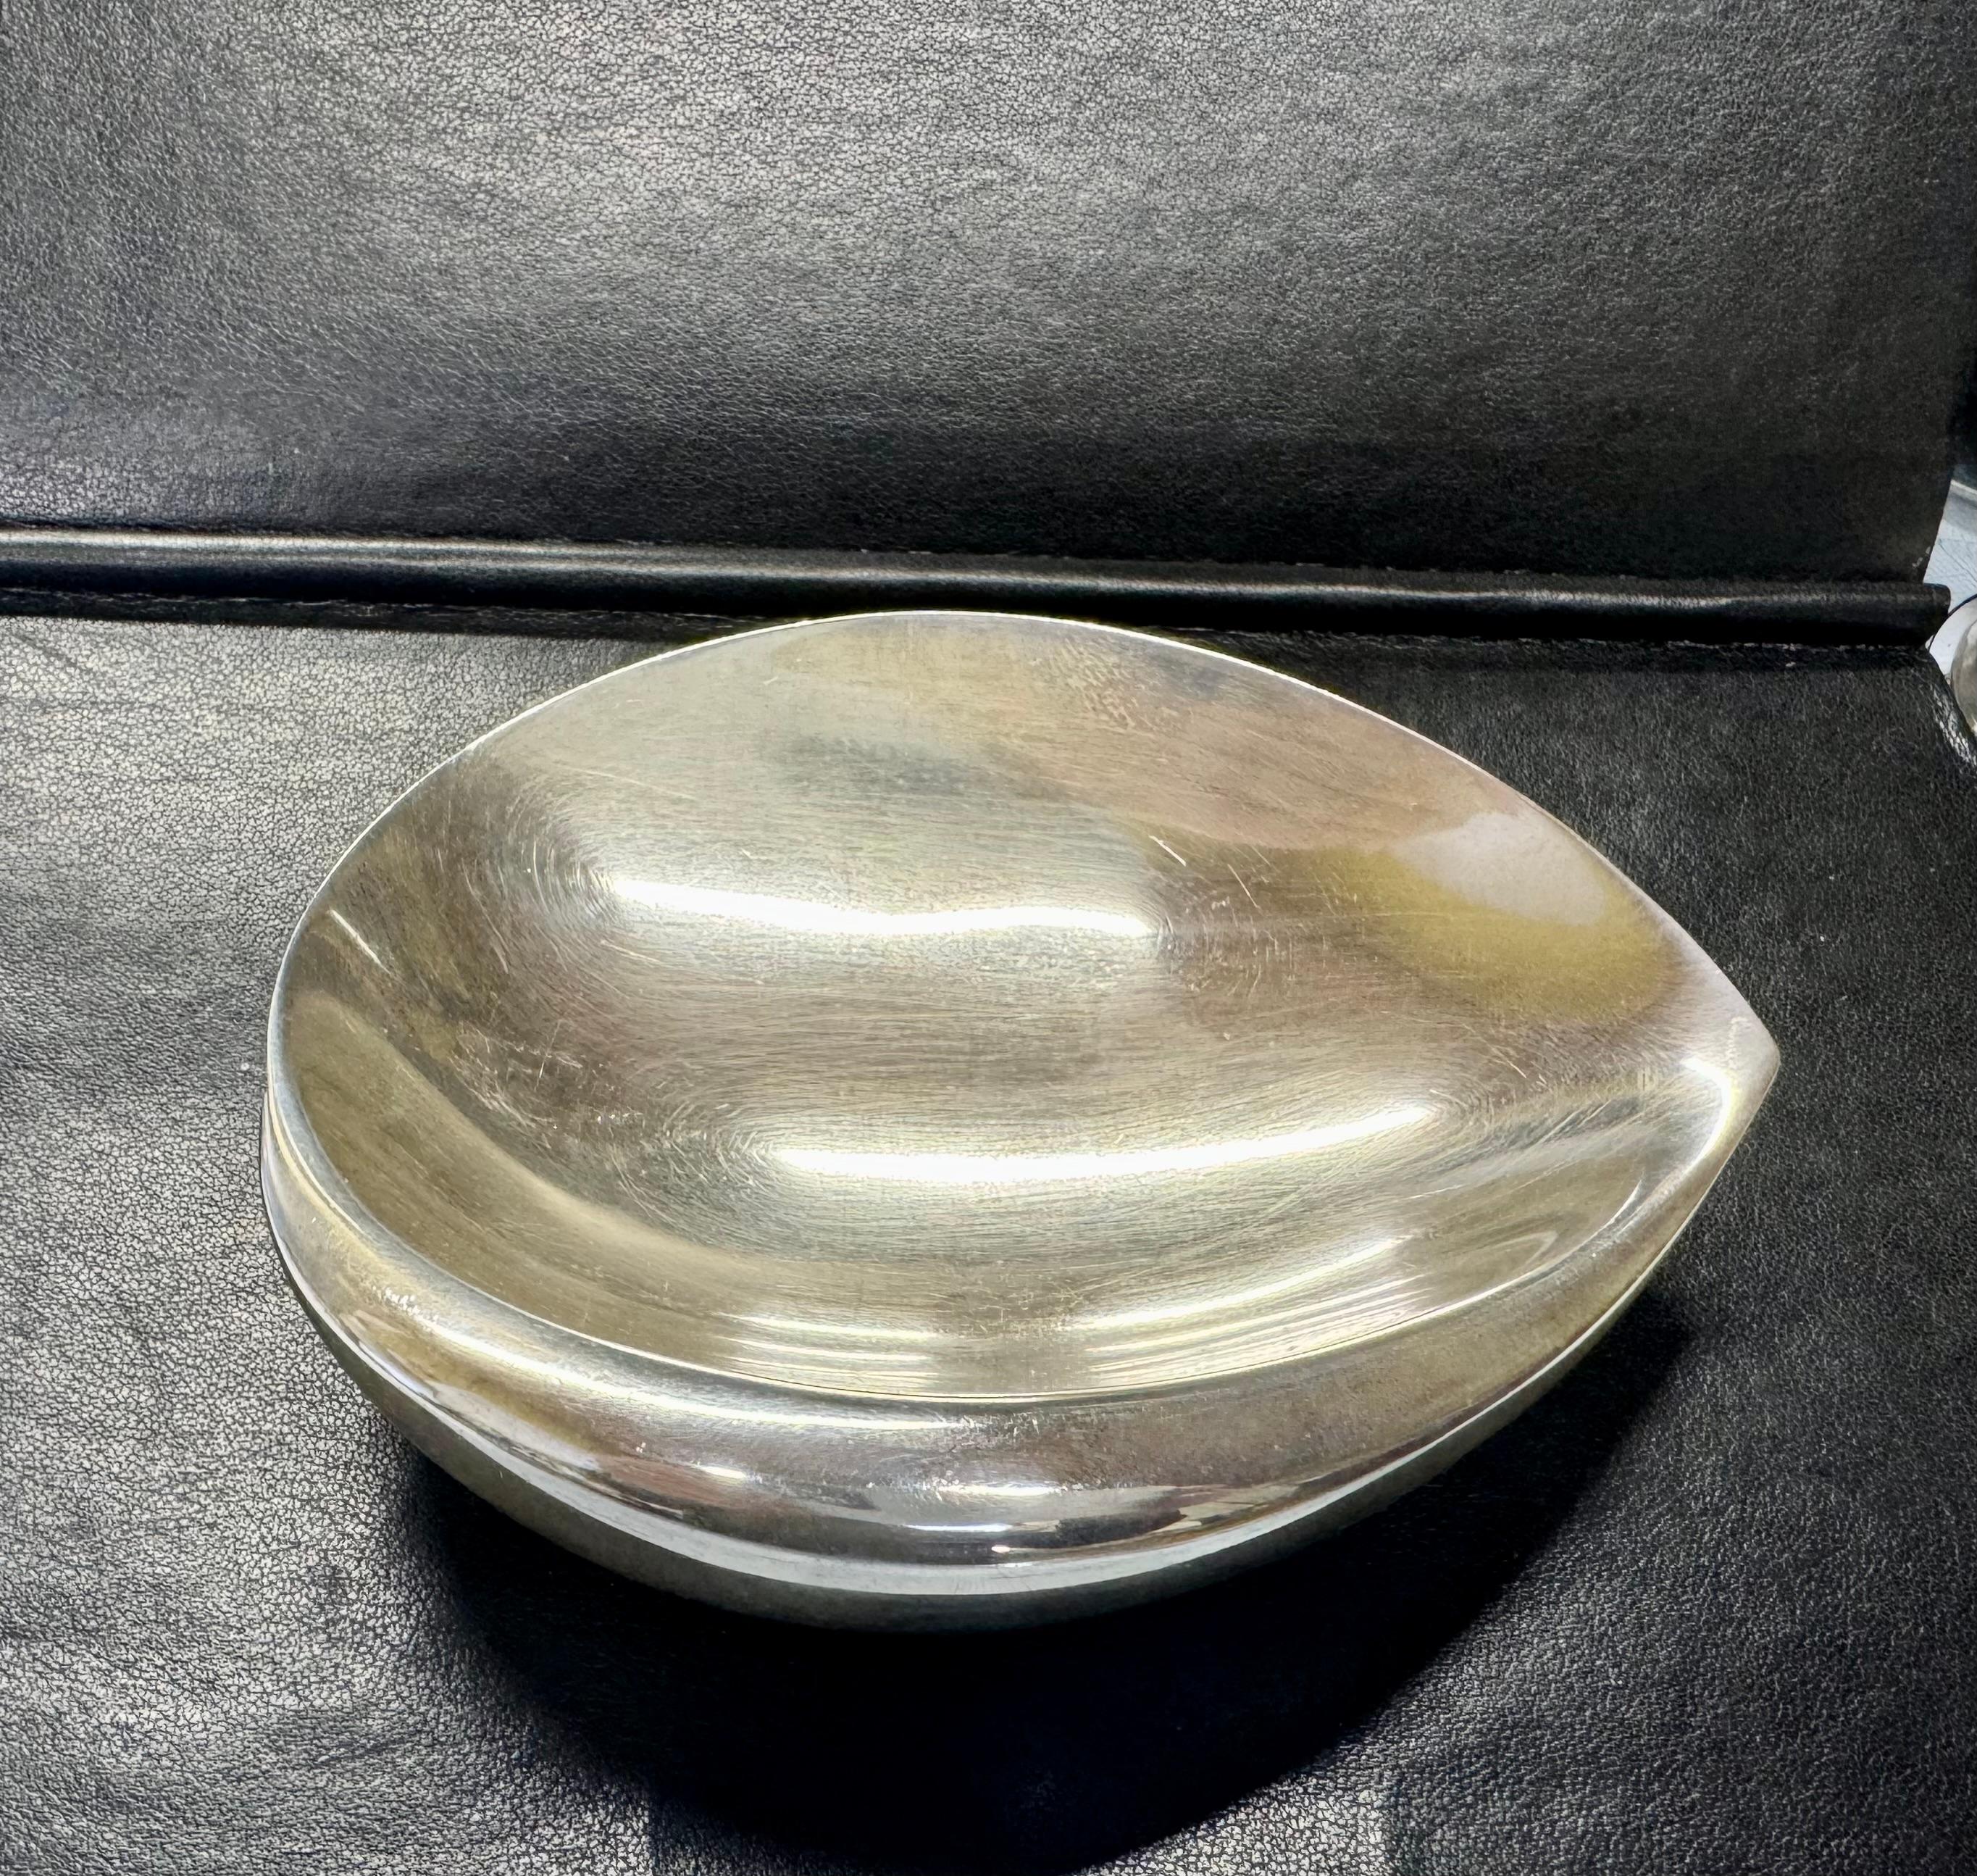 Silver Tapio Wirkkala Art Bowl 1957

Similar described in Tapio Wirkkala's books.
Bowl Made of 916H Silver.
Made in Hämeenlinna, Finland 1957.
No Engravings.
Nice Bowl.
In great condition for its age.


Tapio Wirkkala (1915-1985) rose to world fame